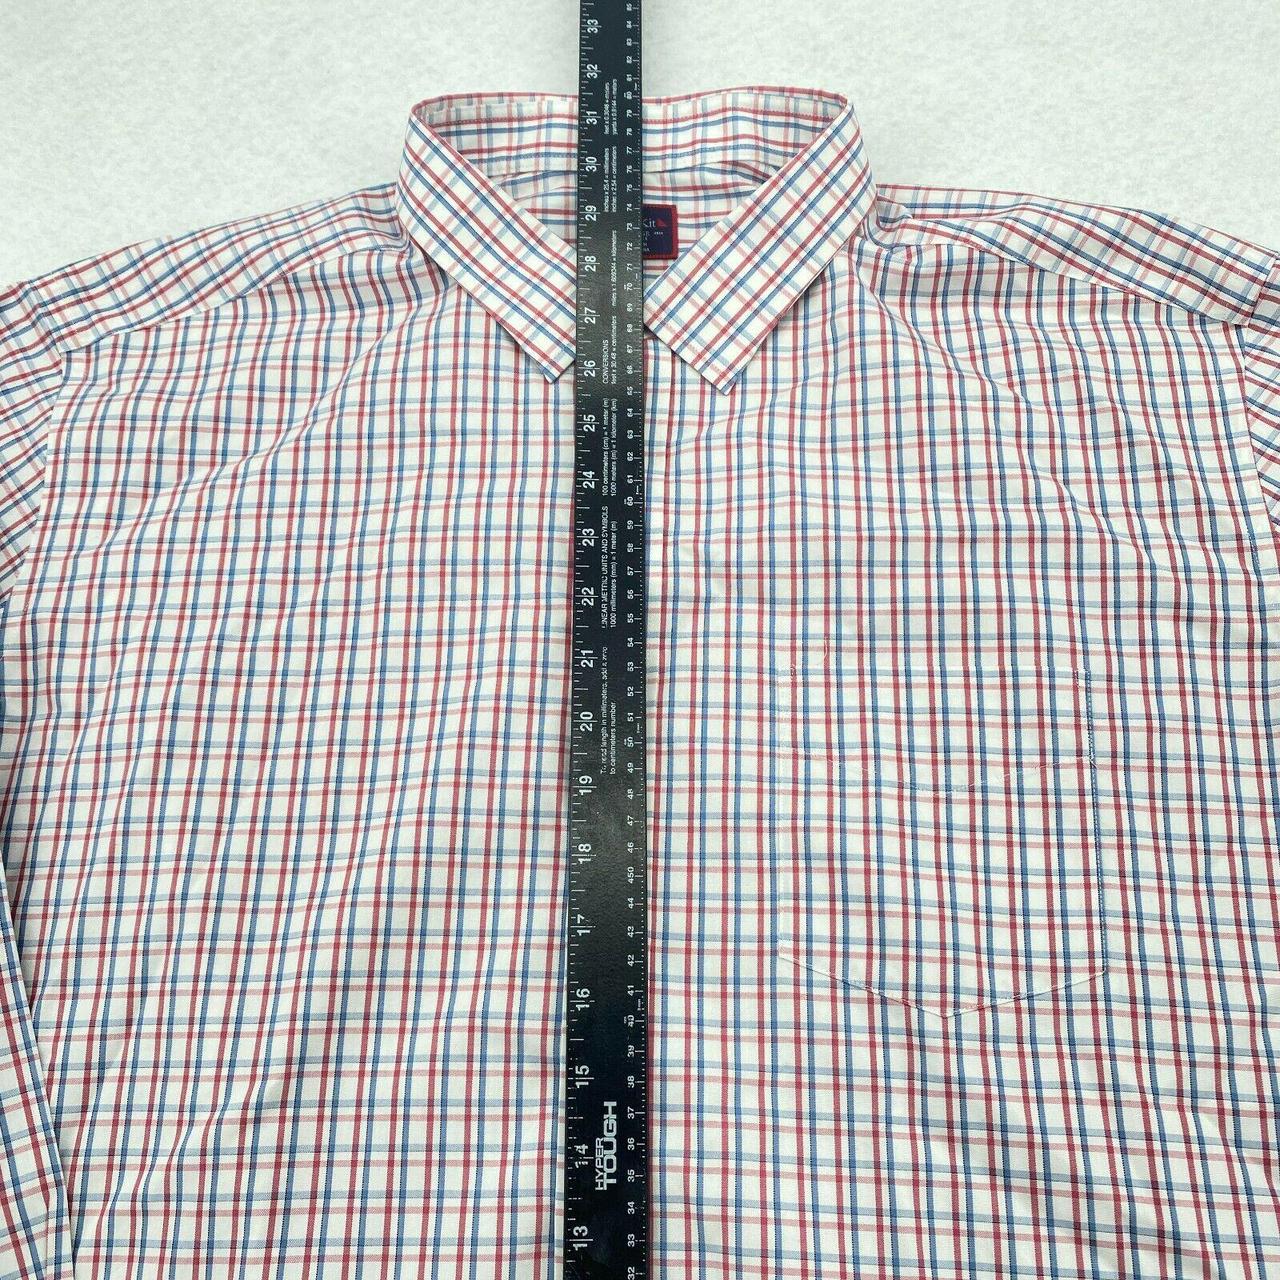 Product Image 3 - UNTUCKIT Red Blue Plaid Long